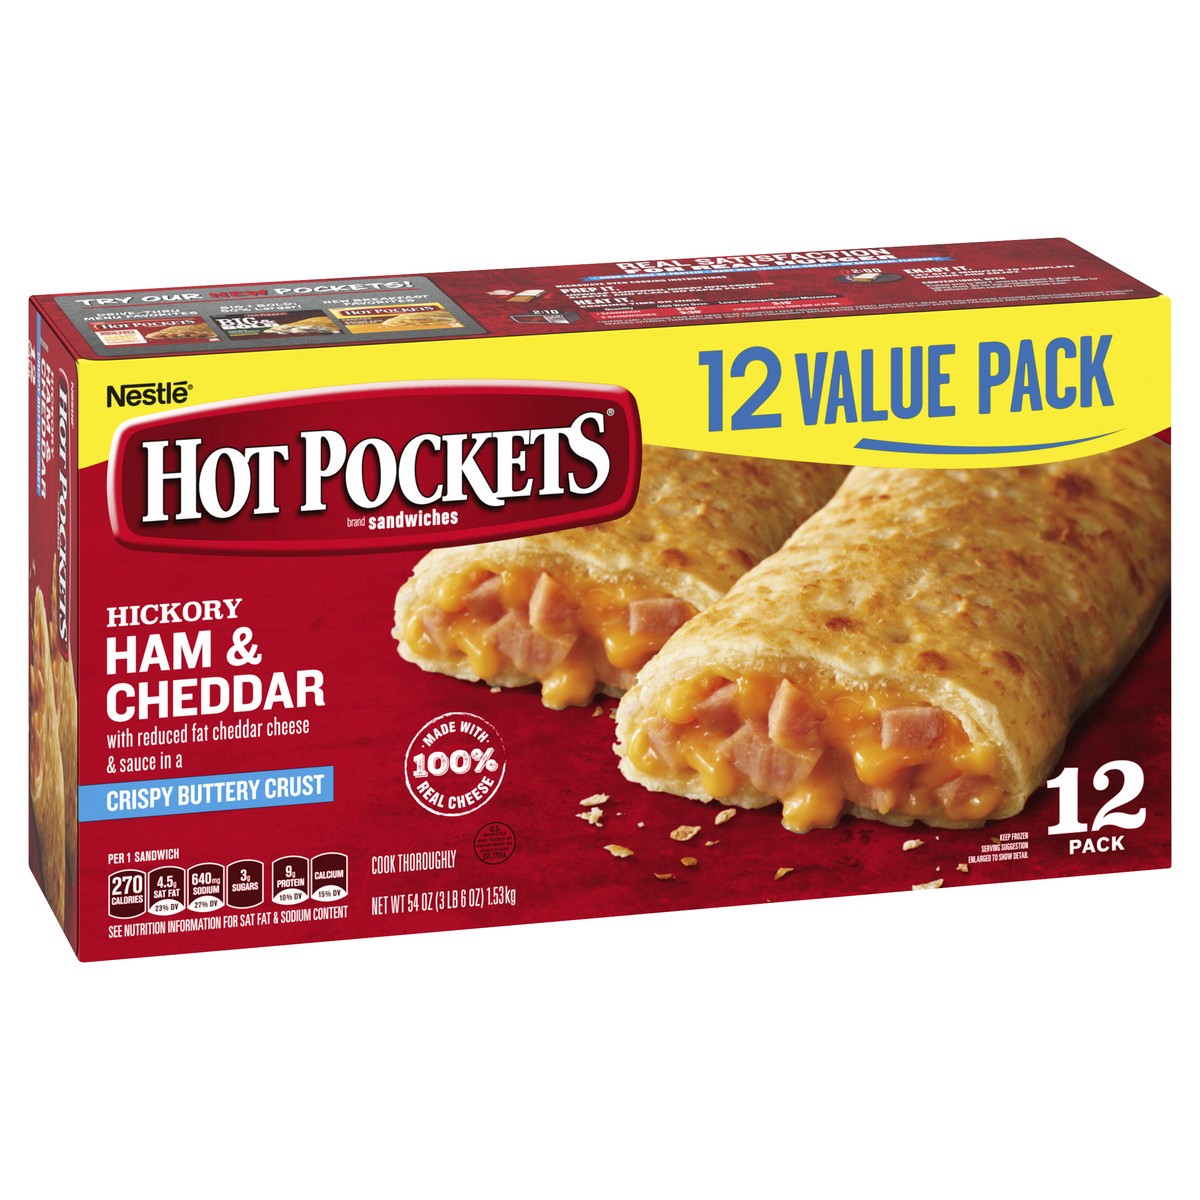 slide 2 of 8, Hot Pockets Hickory Ham & Cheddar Frozen Snacks in a Crispy Buttery Crust, Frozen Ham and Cheese Sandwiches, 12 Count, 12 ct